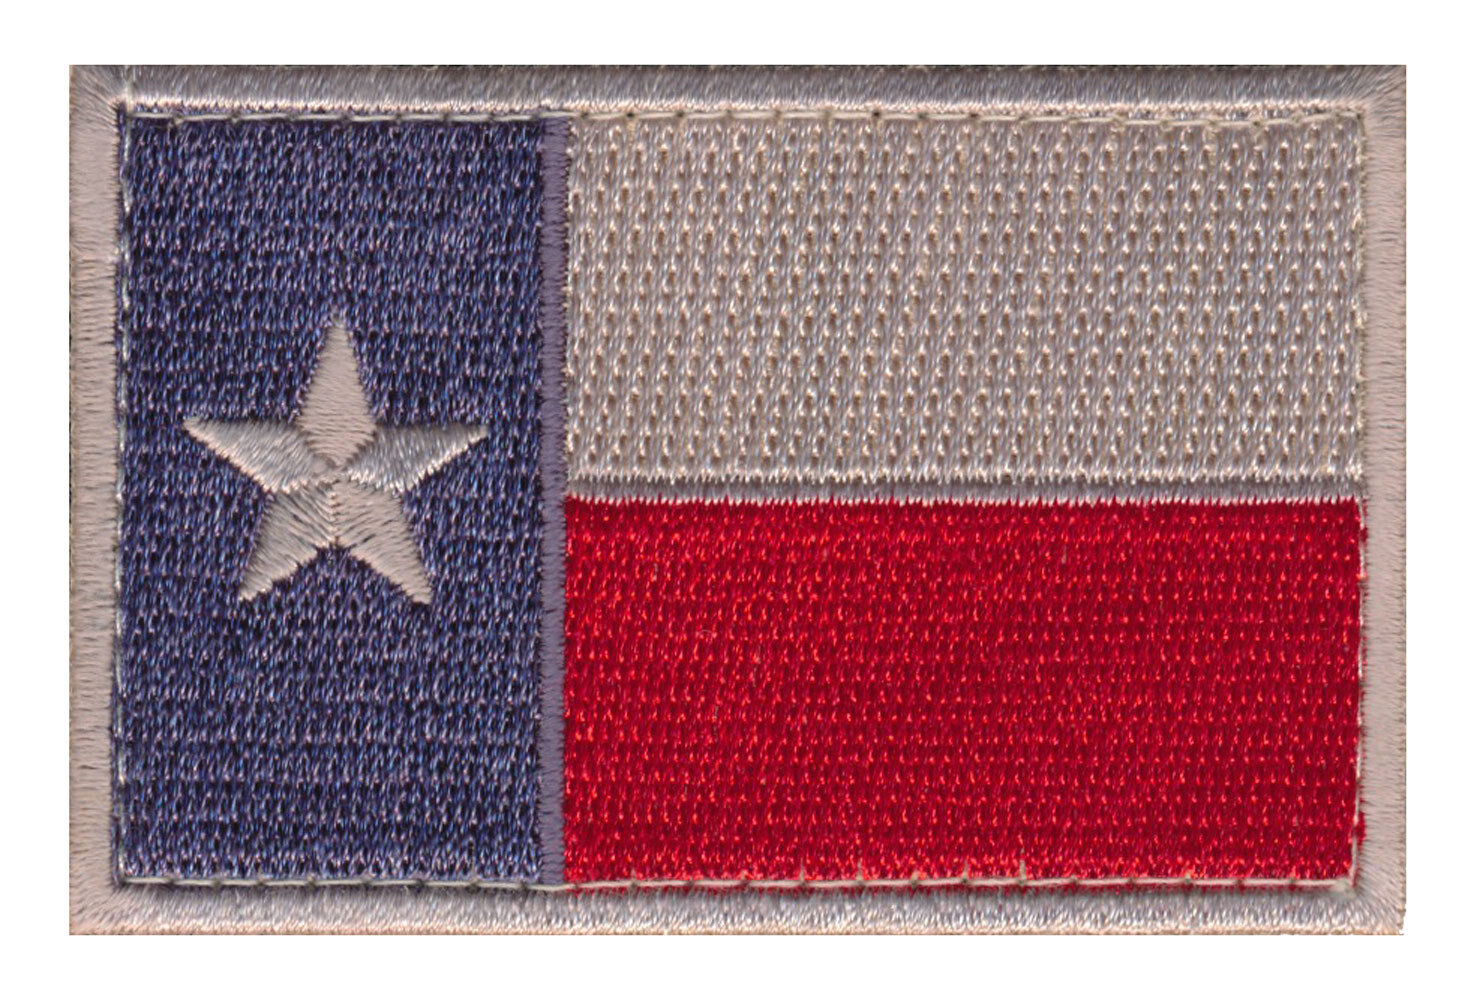 TEXAS TX STATE FLAG SUBDUED LONE STAR HOOK PATCH